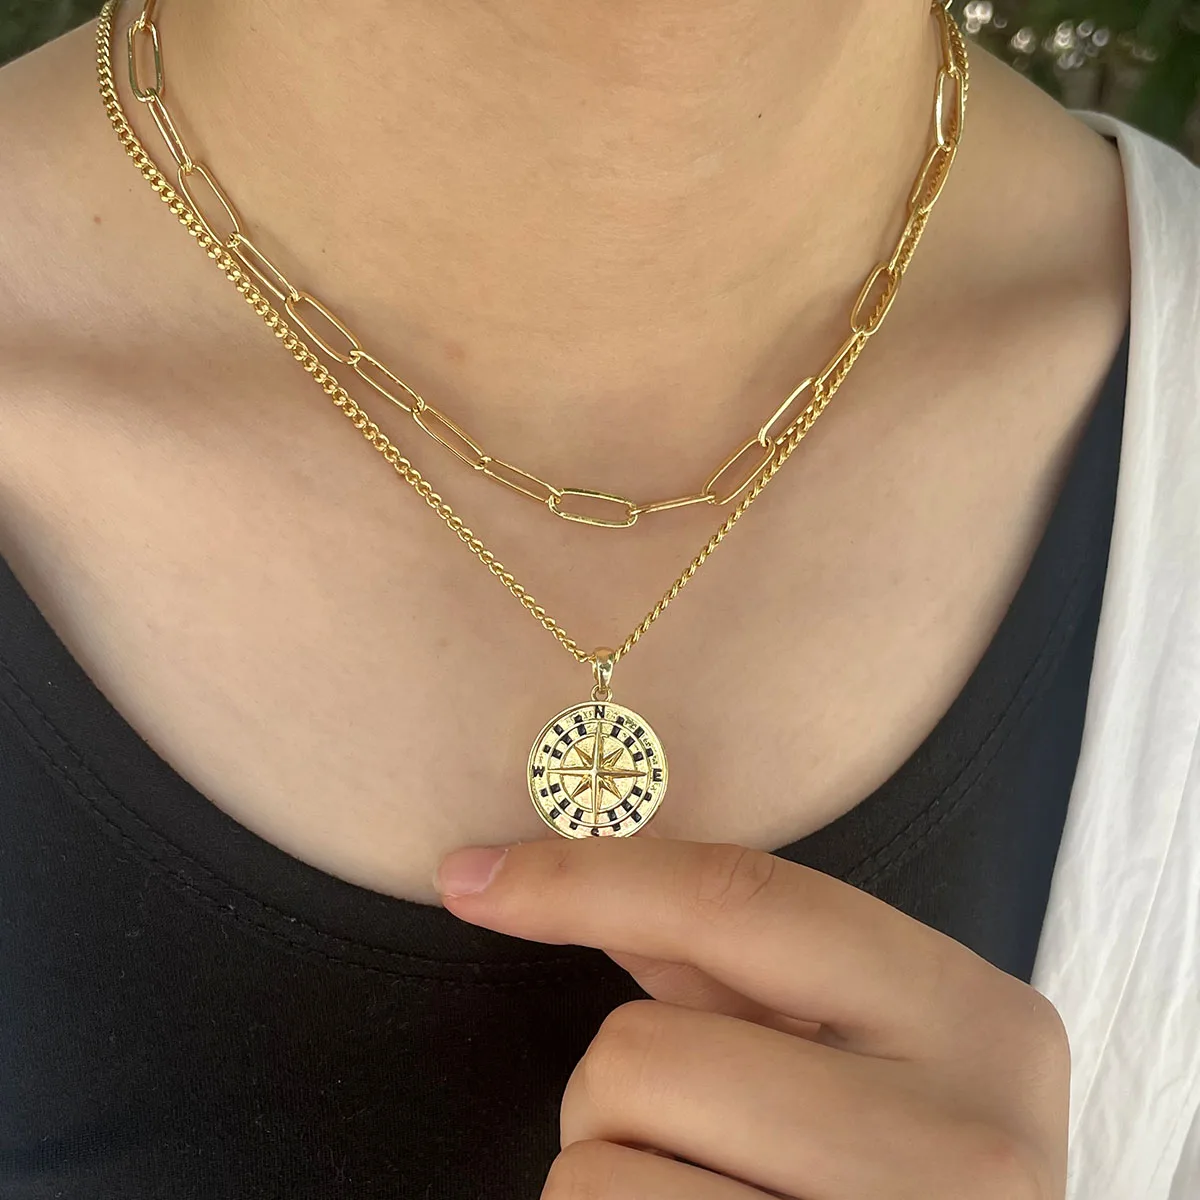 

MHS.SUN Retro Jewelry Zircon Snake/Compass/Heart/Sun/Lock Pendant Layered Necklace Gold Plated Clavicle Chain Choker For Women